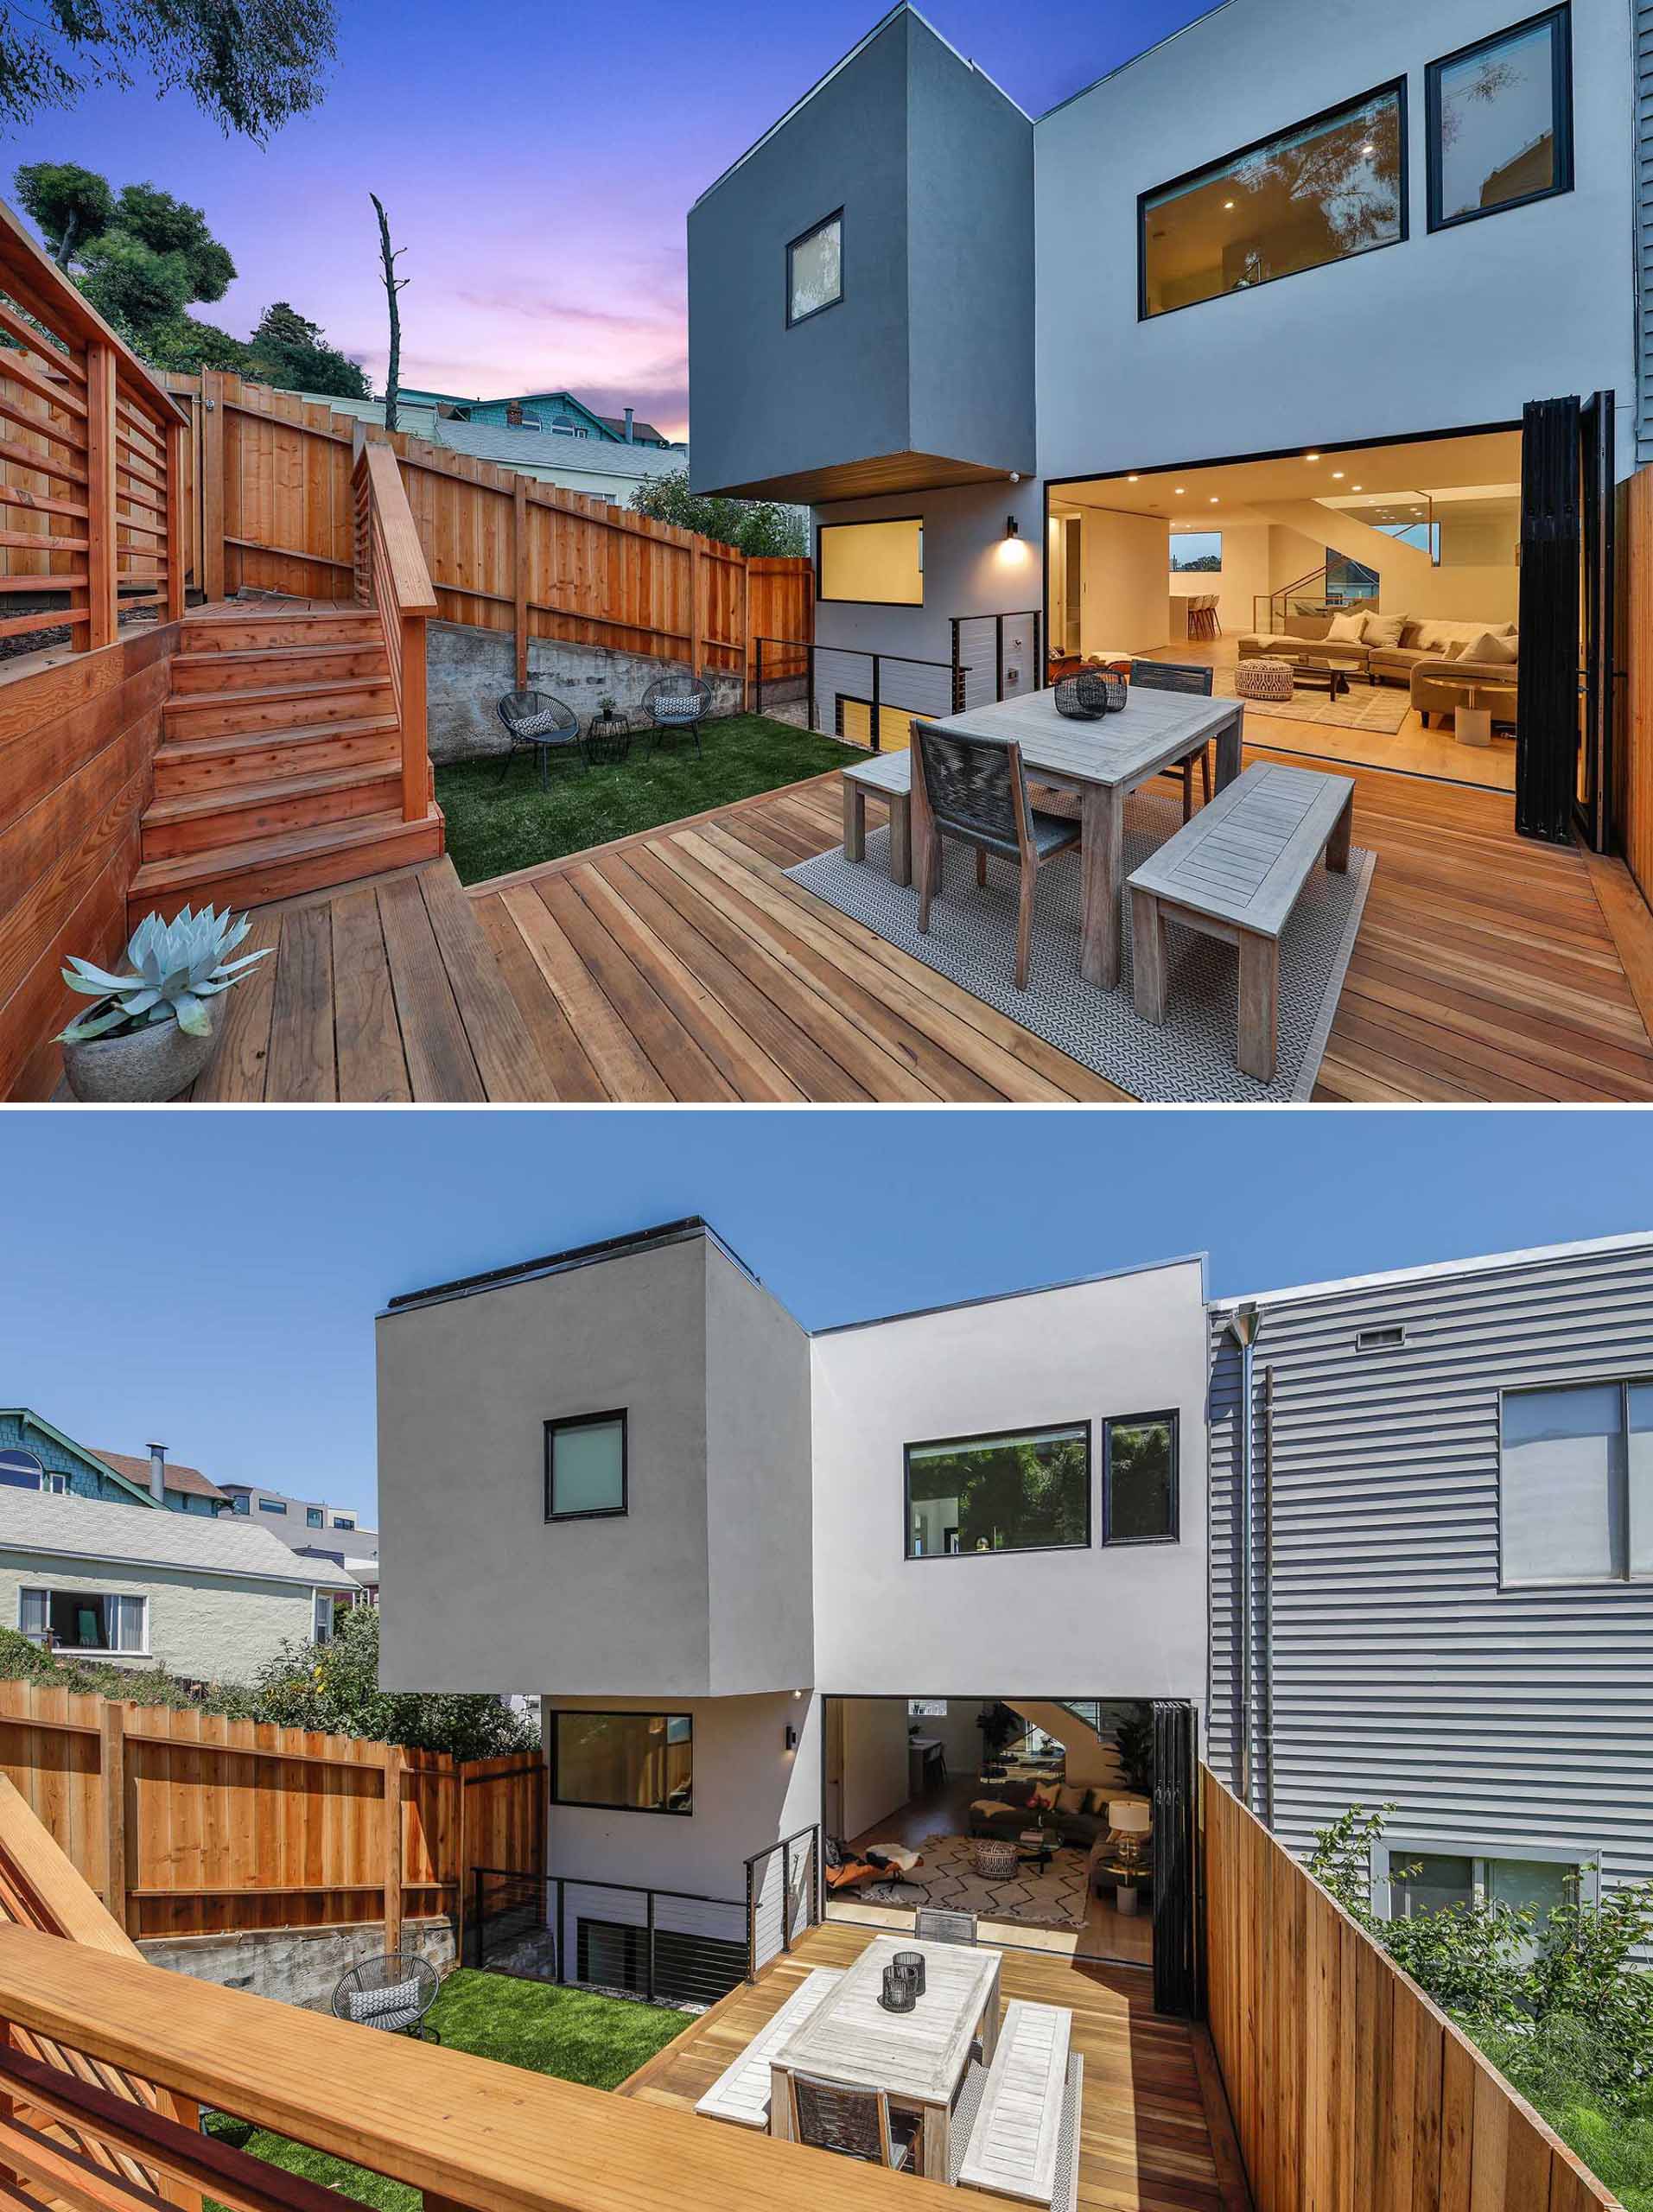 A modern renovated house with a rear deck for outdoor dining.